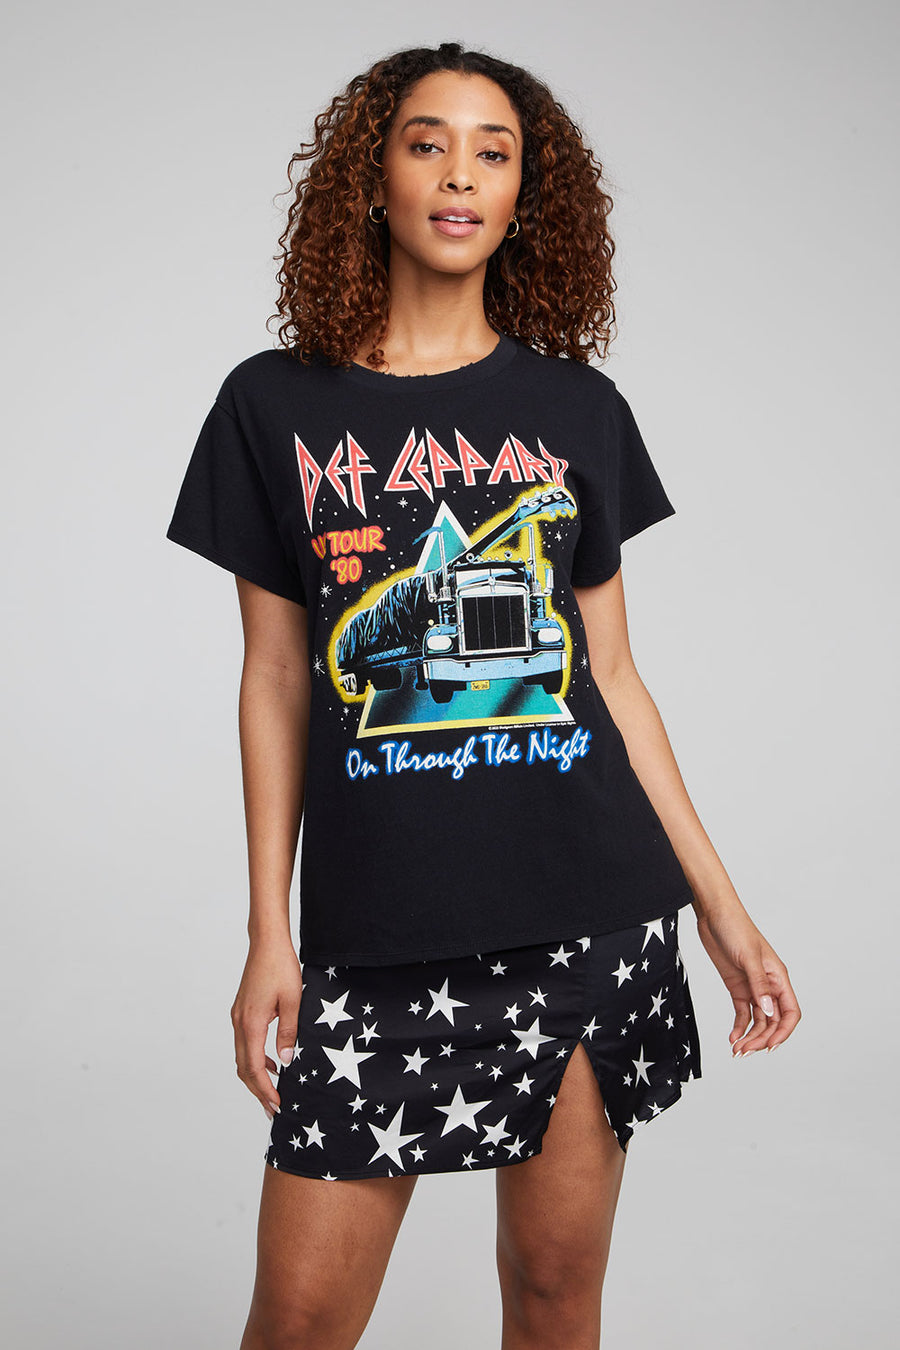 Def Leppard On Through The Night Tee WOMENS chaserbrand